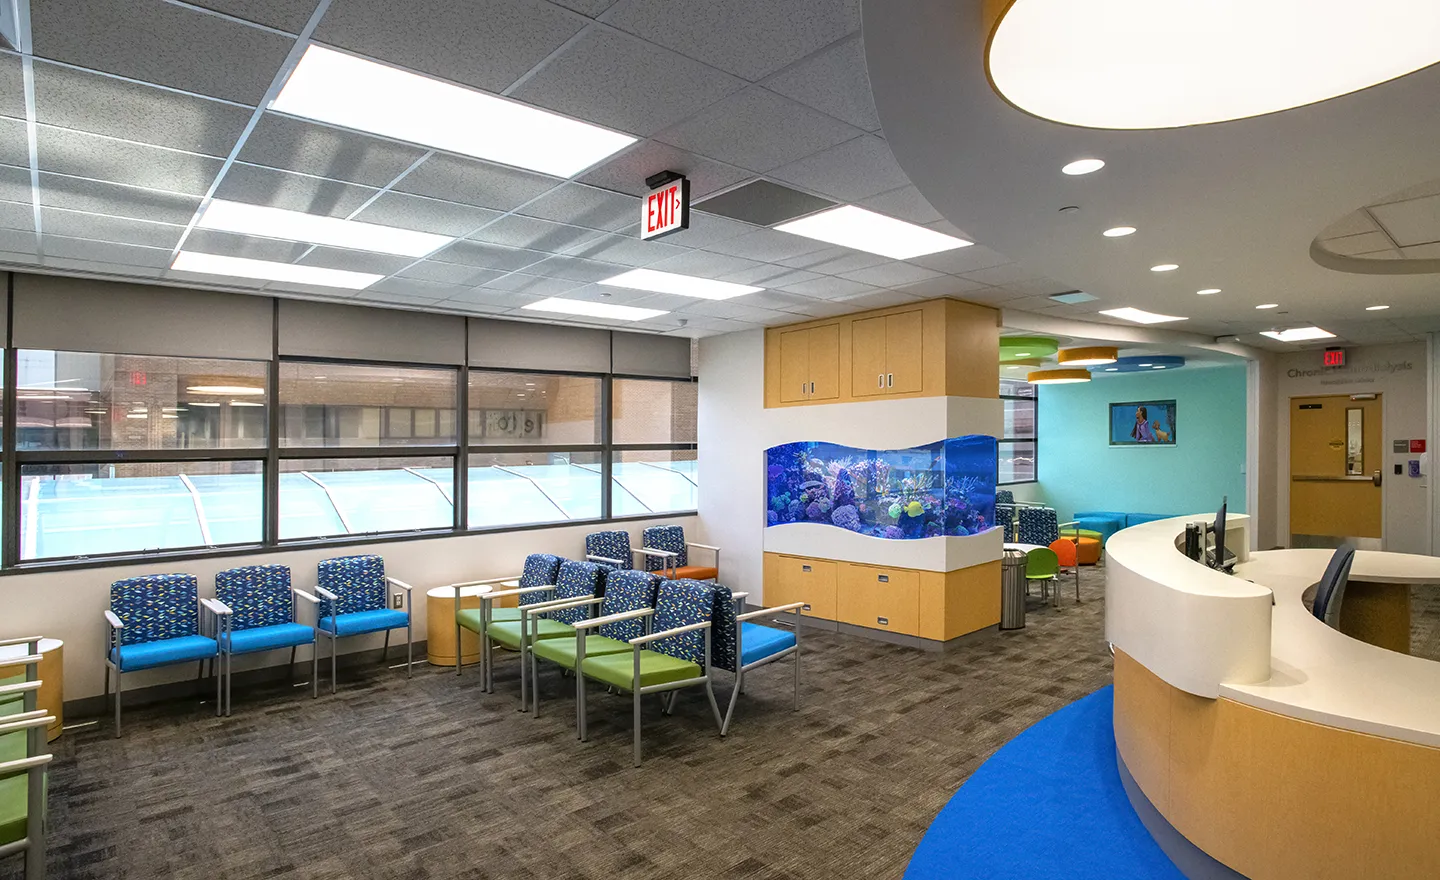 Brightly colored furniture and fixtures complement the underwater theme and enhance patient experience.